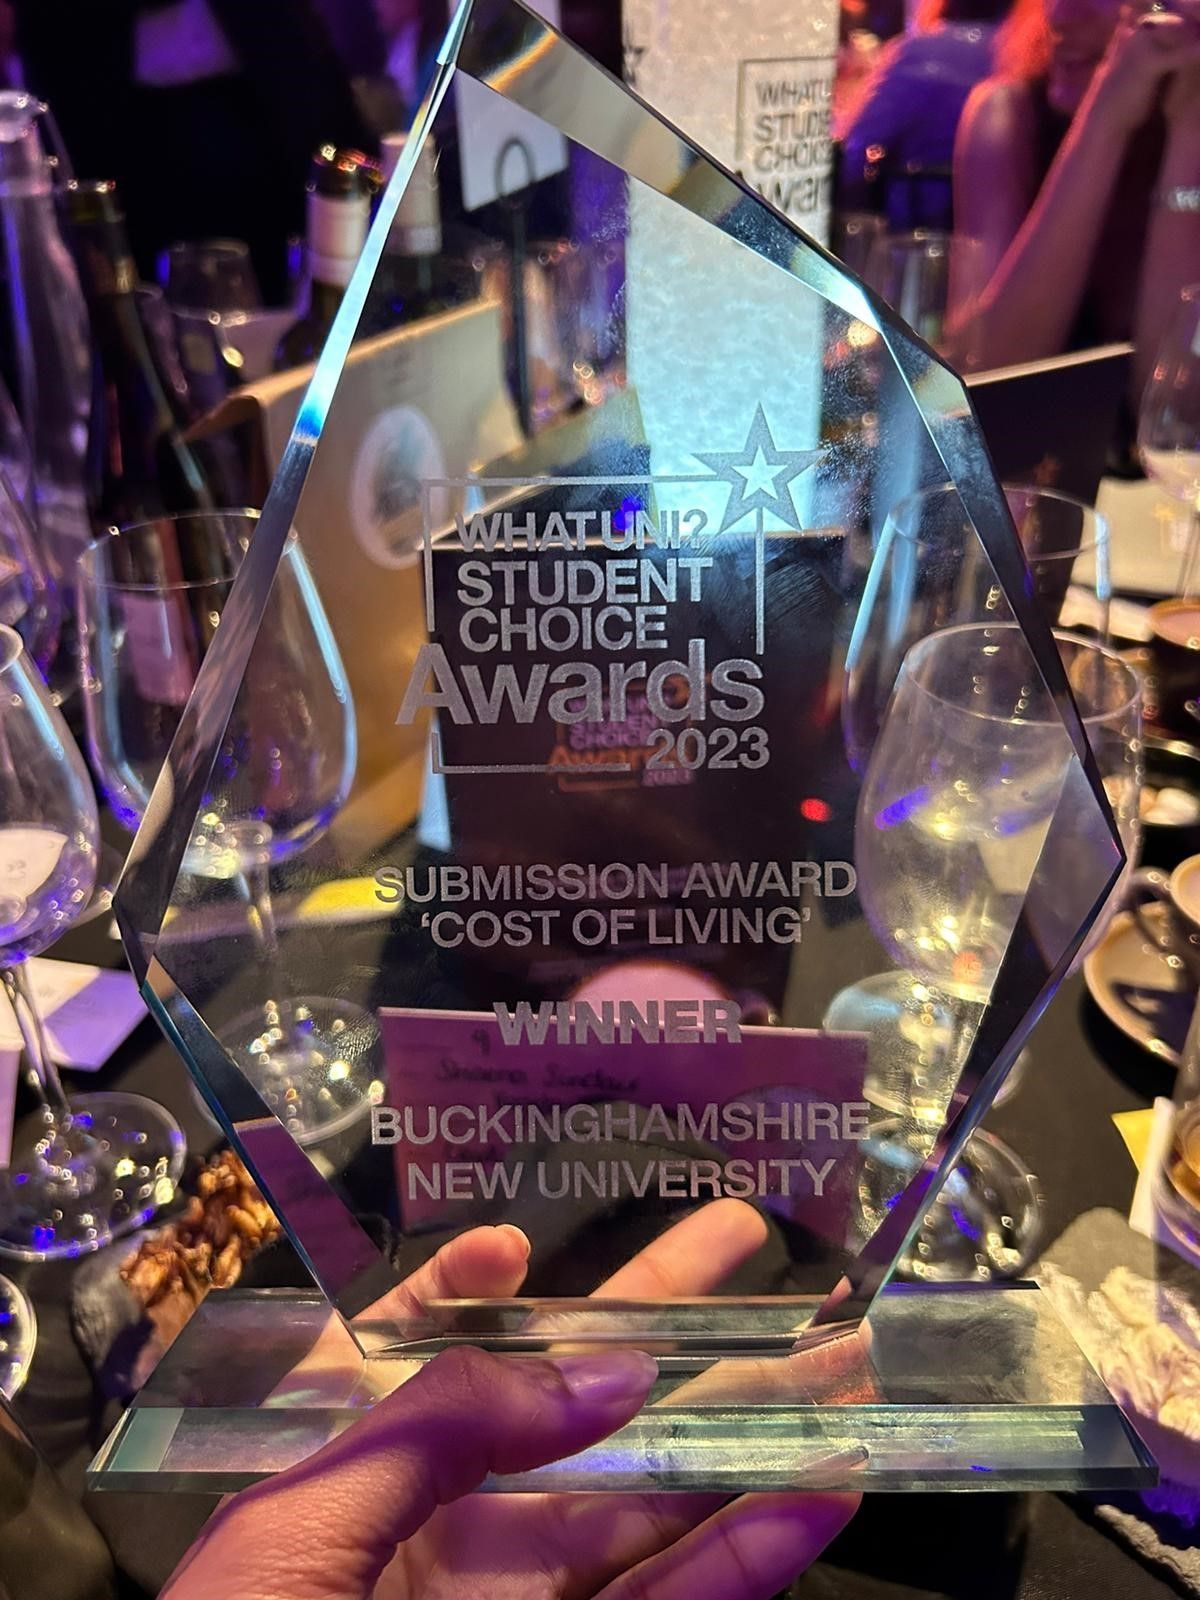 Trophy entitled: "Whatuni student choice awards 2023. Submission award 'cost of living'. Winner: Buckinghamshire New University"